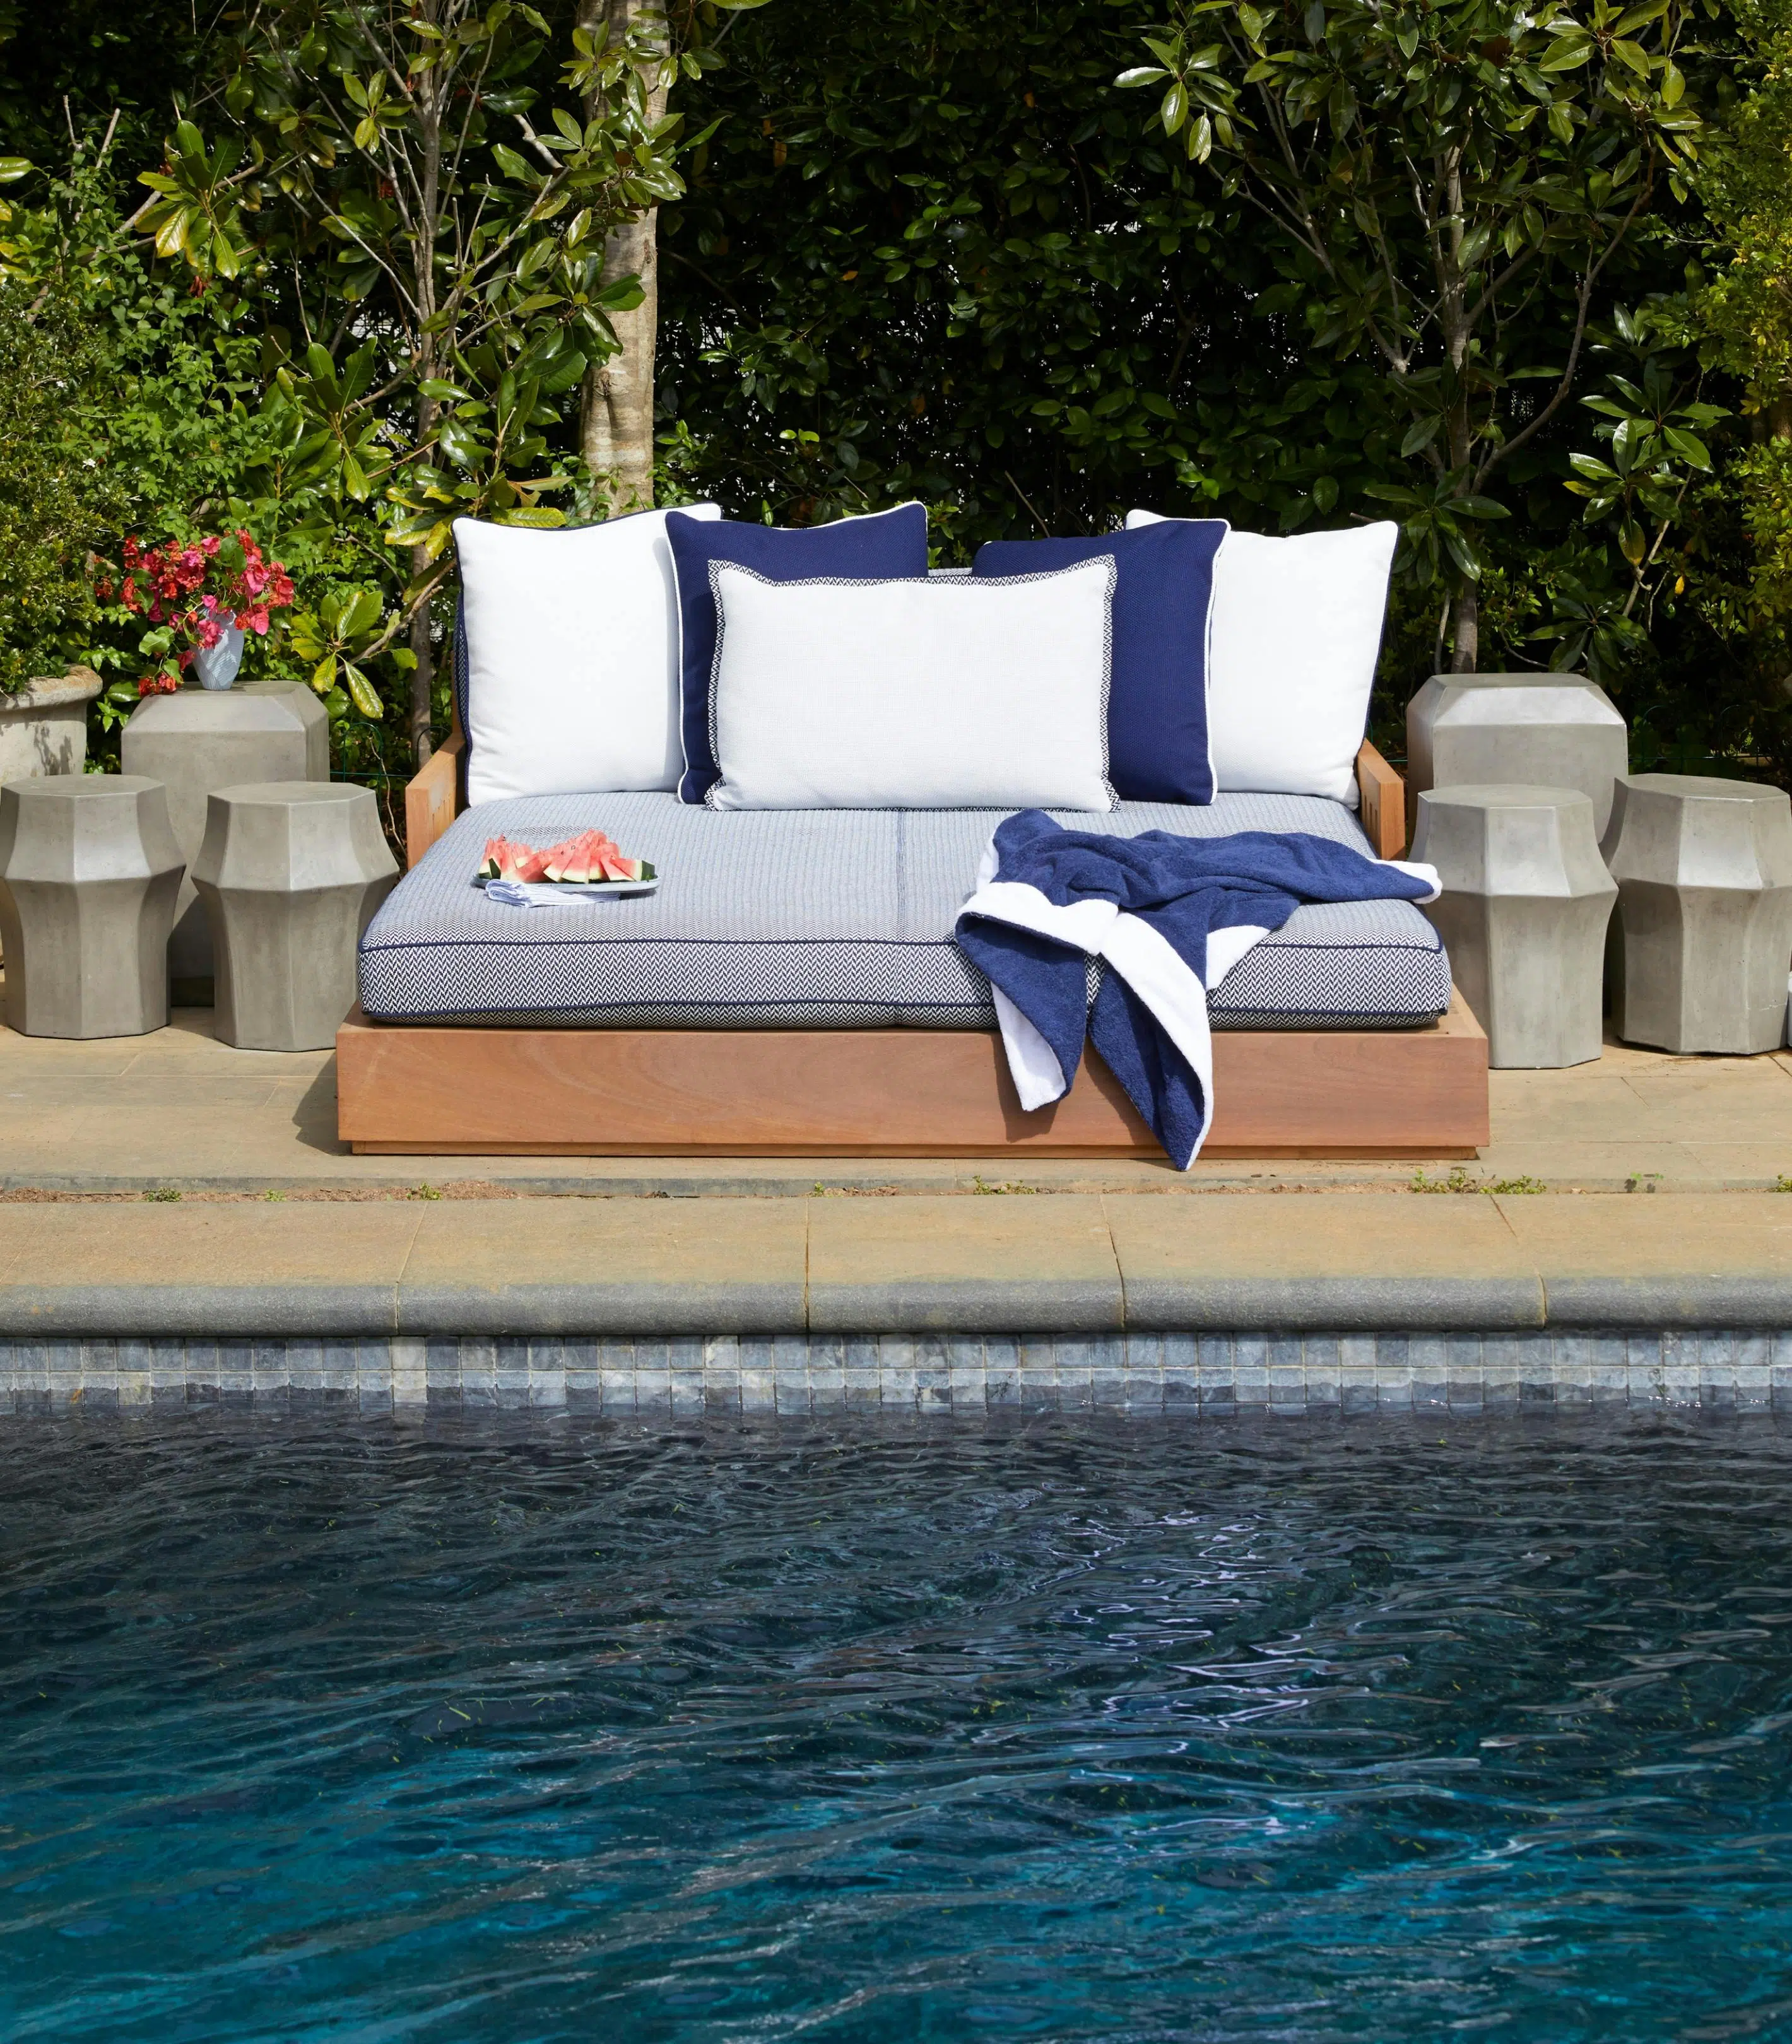 The water of a dark-bottomed swimming pool is visible in front of poolside furniture holding blue and white cushions, a blue-and-white towel, and a plate of watermelon slices. Lush greenery is in the background